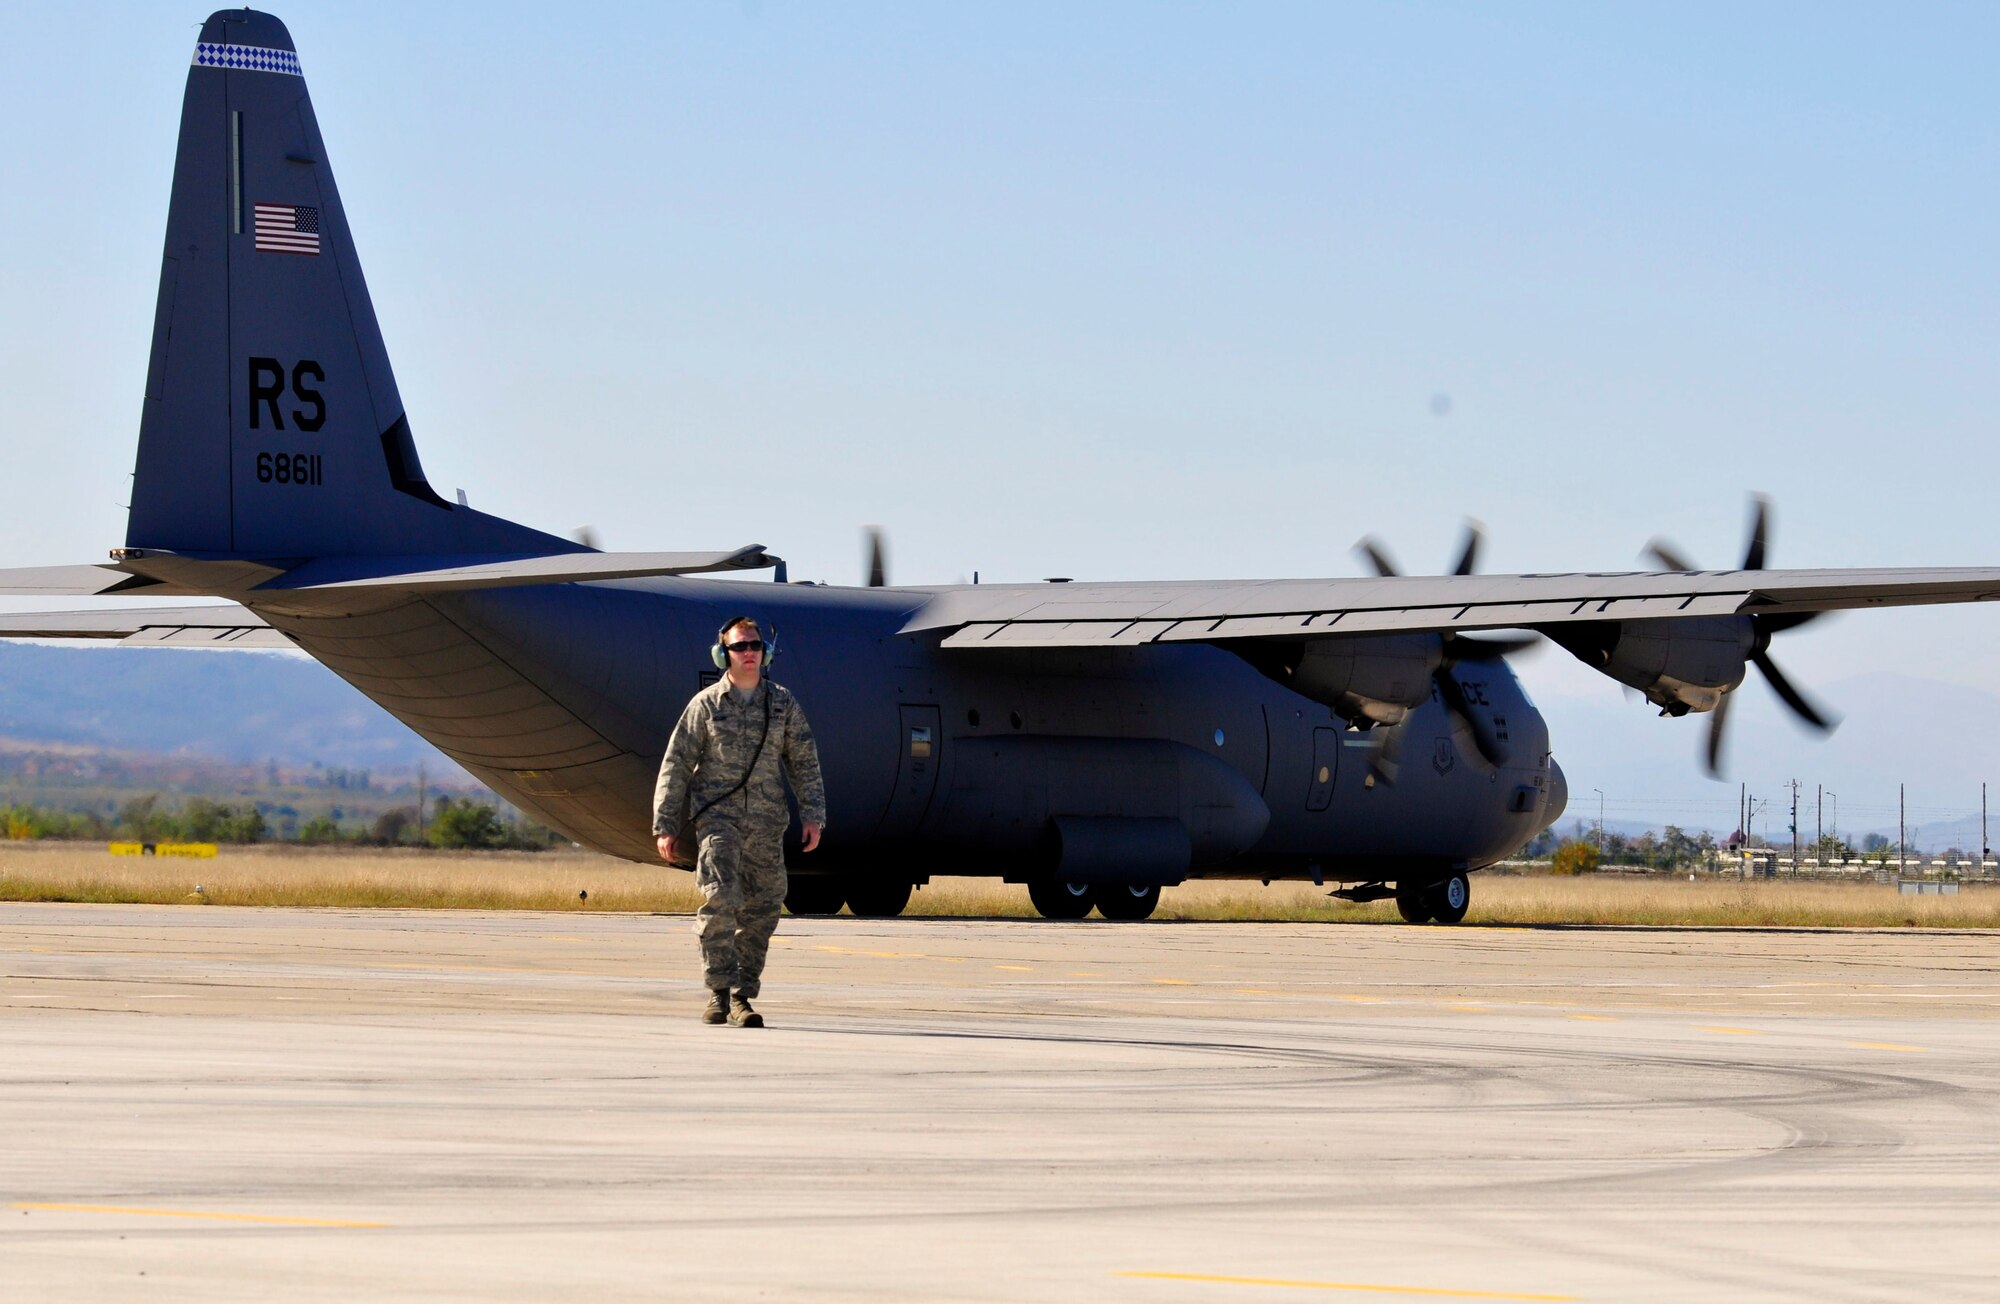 U.S. Air Force Senior Airman Shaun Moody from the 86th Aircraft Maintenance Squadron marshals out a C-130J Super Hercules as it takes off carrying more than 60 Bulgarian Air Force paratroopers who will jump over the skies of Plovdiv, Bulgaria during Thracian Fall 2010, Oct. 22. Thracian Fall is a two week building partnership capacity exercise between U.S. and Bulgarian airmen. (U.S. Air Force photo by Tech. Sgt. Michael Voss)